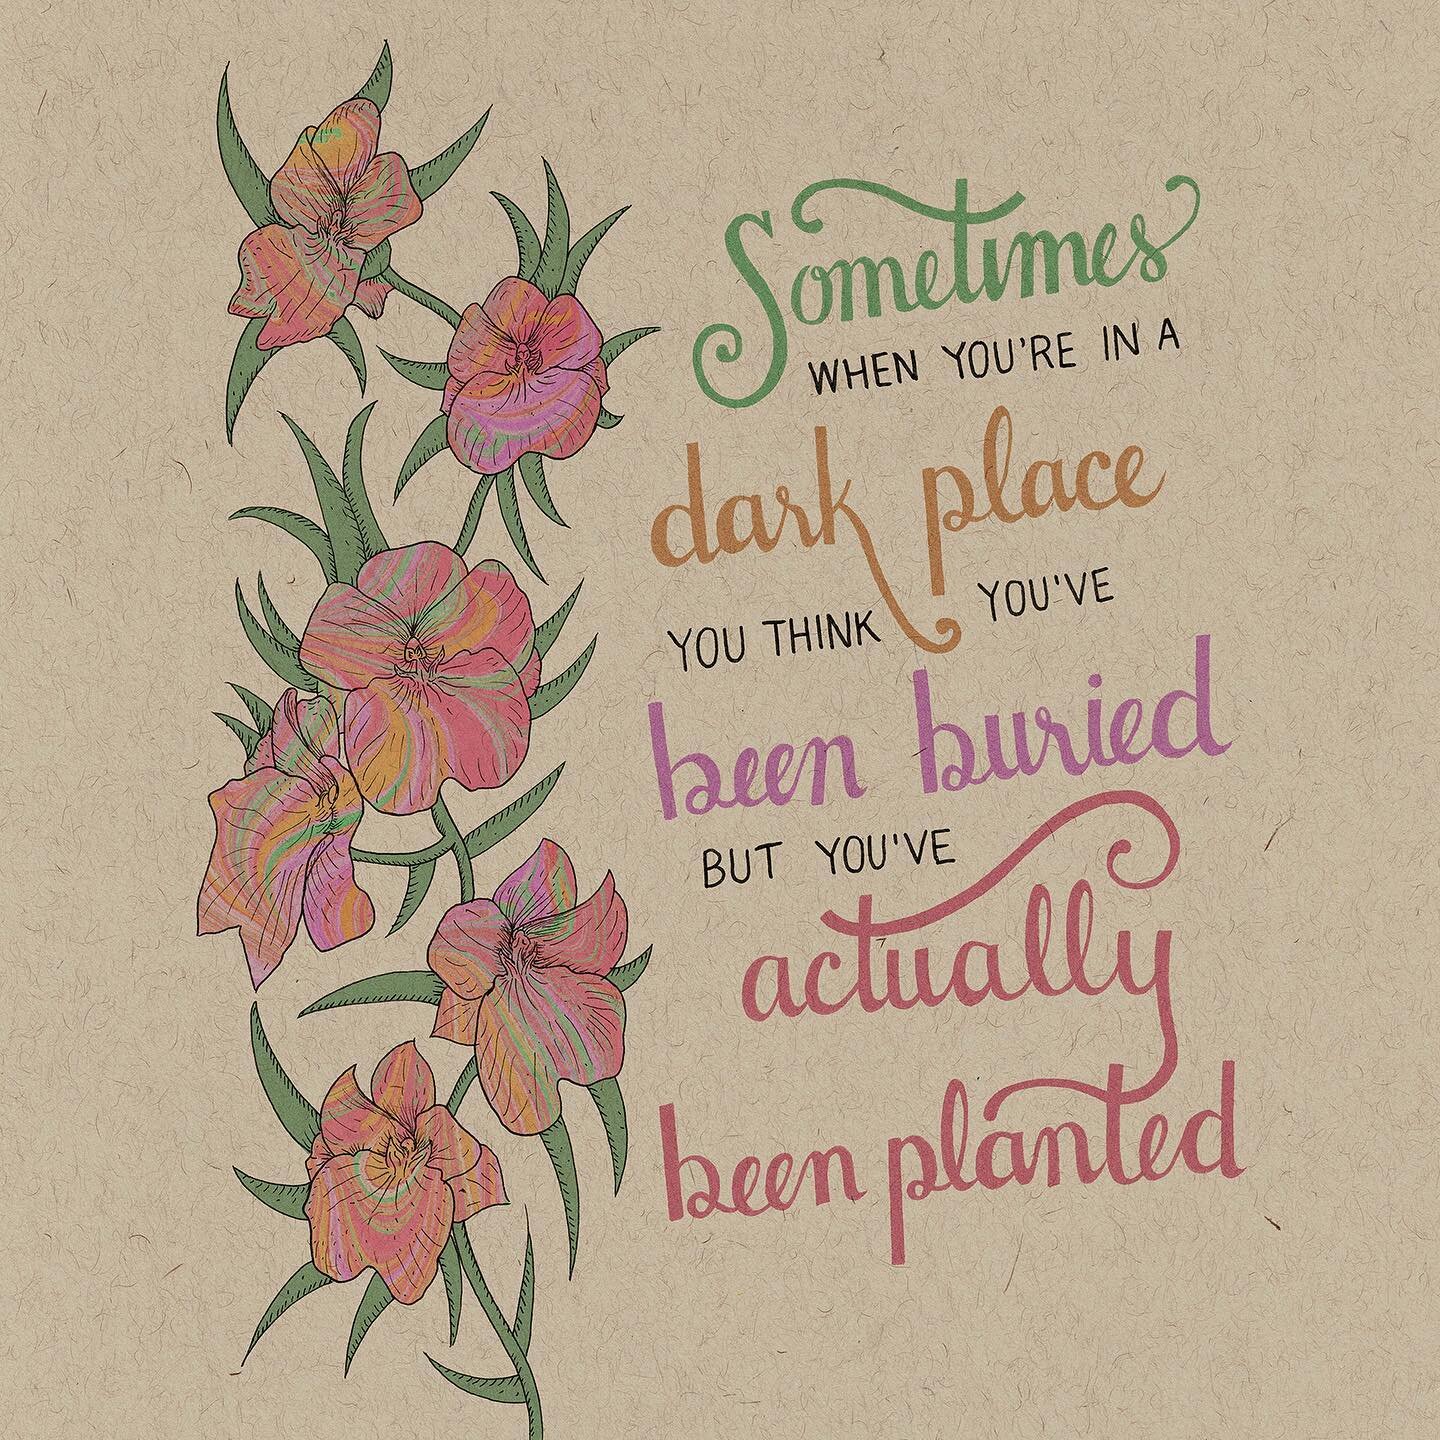 I originally drew this in 2016 from some orchids my parents had at the time. I scanned it long ago, but only got to finishing it now. This quote is by Christine Caine. I found it many years ago and it still resonates with me.

Being in a dark place i